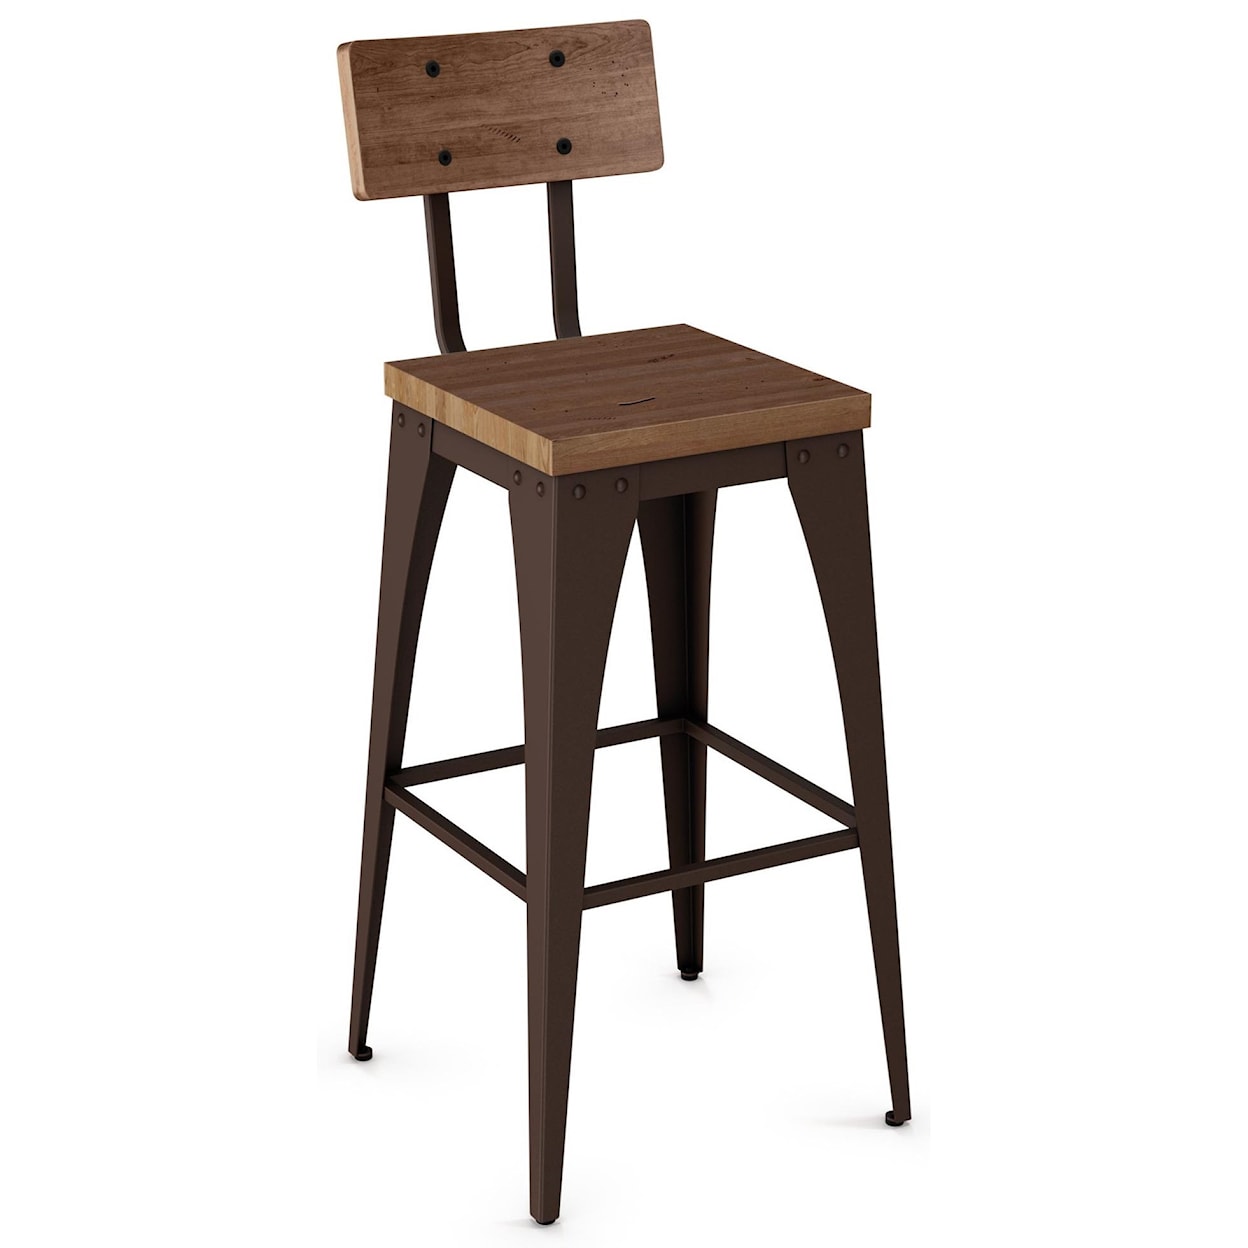 Amisco Industrial 30" Upright Stool